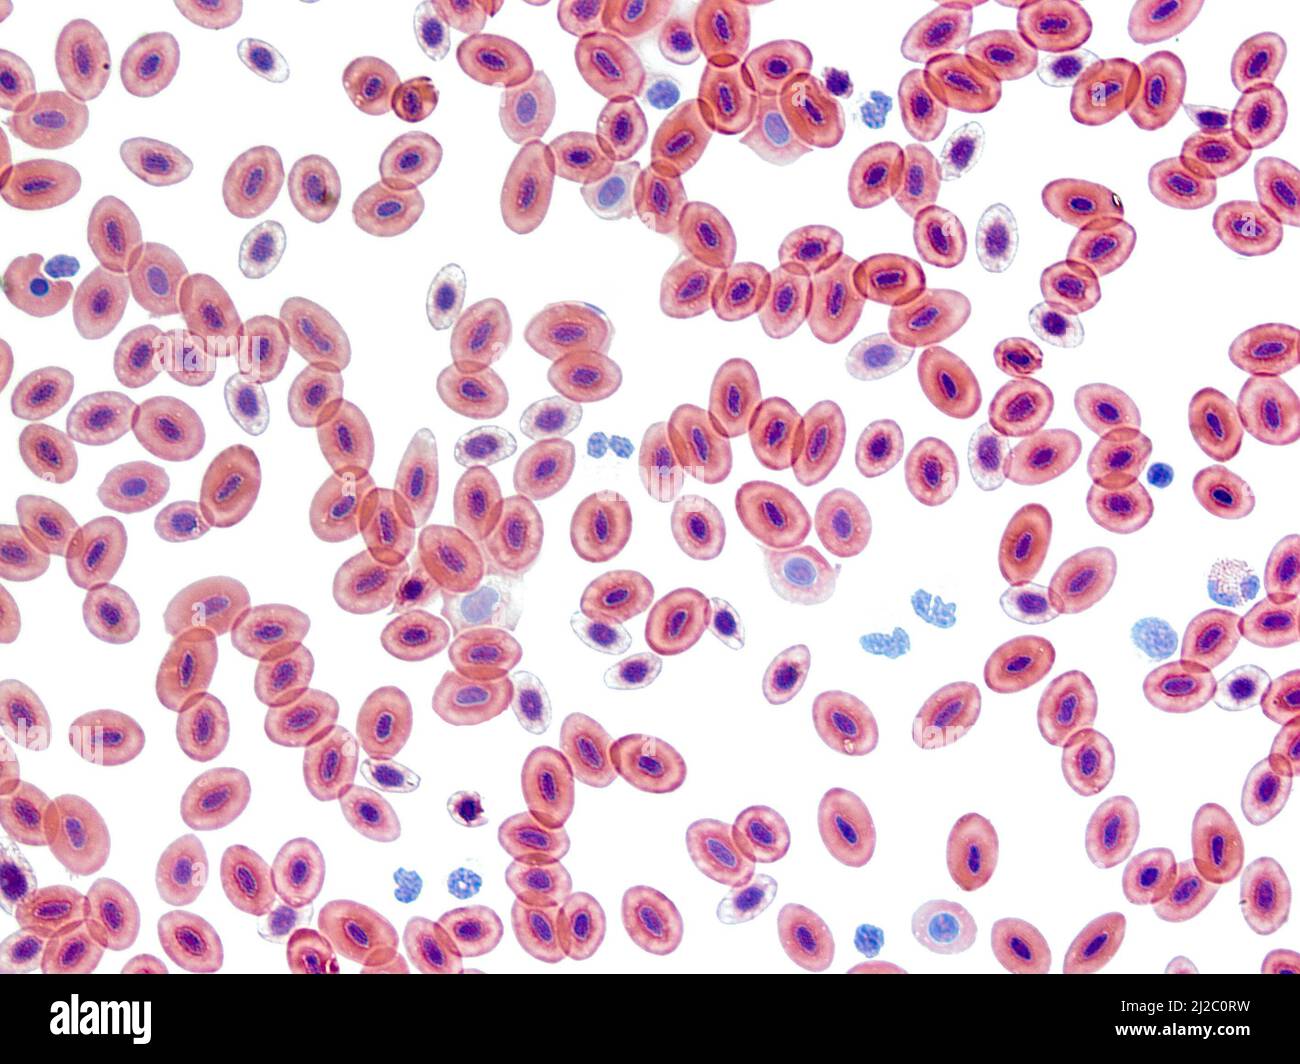 Frog blood, light microscopy. Unlike mammalian erythrocytes (red blood cells) mature frog erythrocytes retain their nuclei. Magnification: x400. Stock Photo